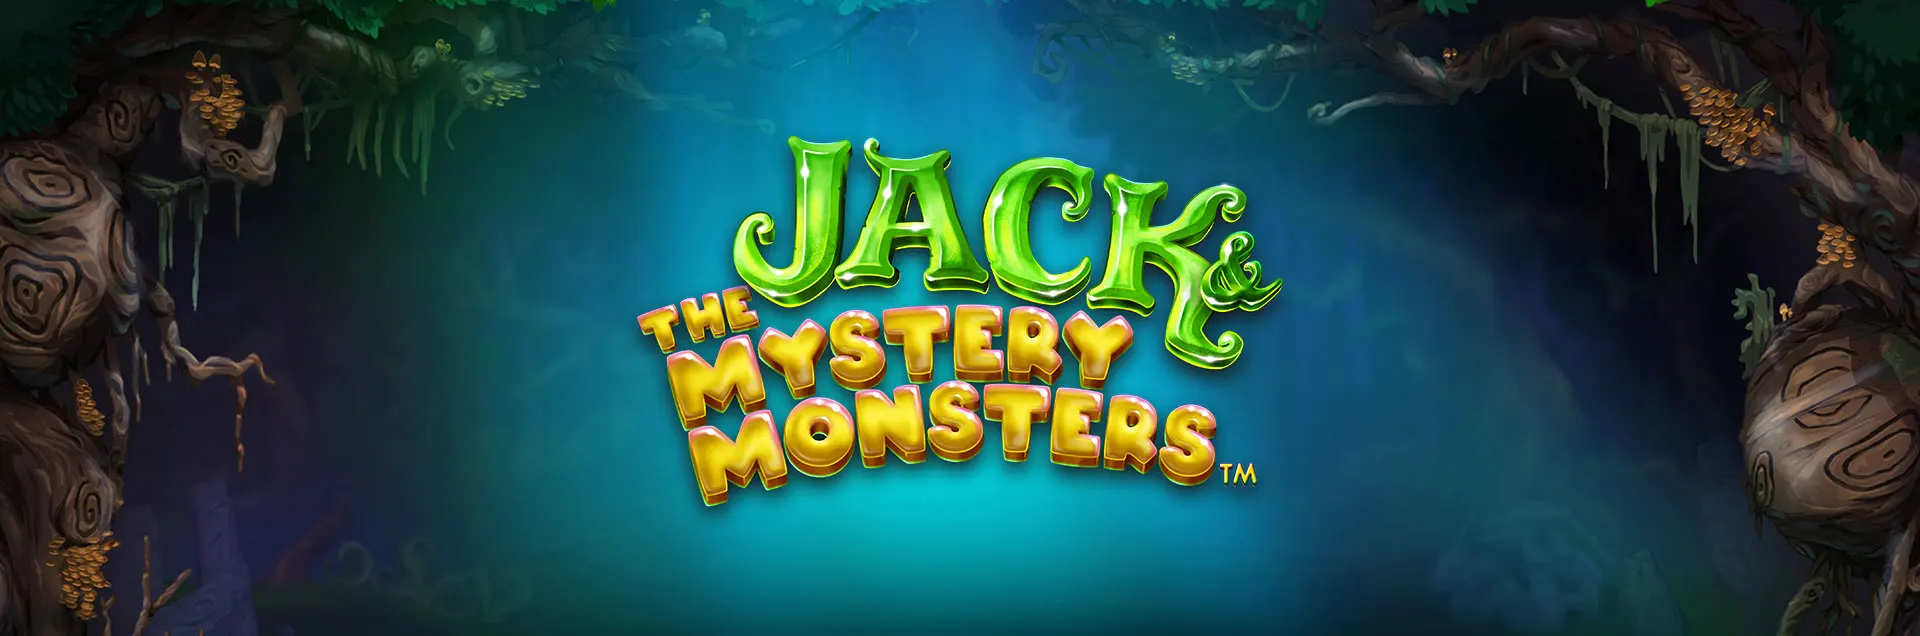 jack and the mystery monsters